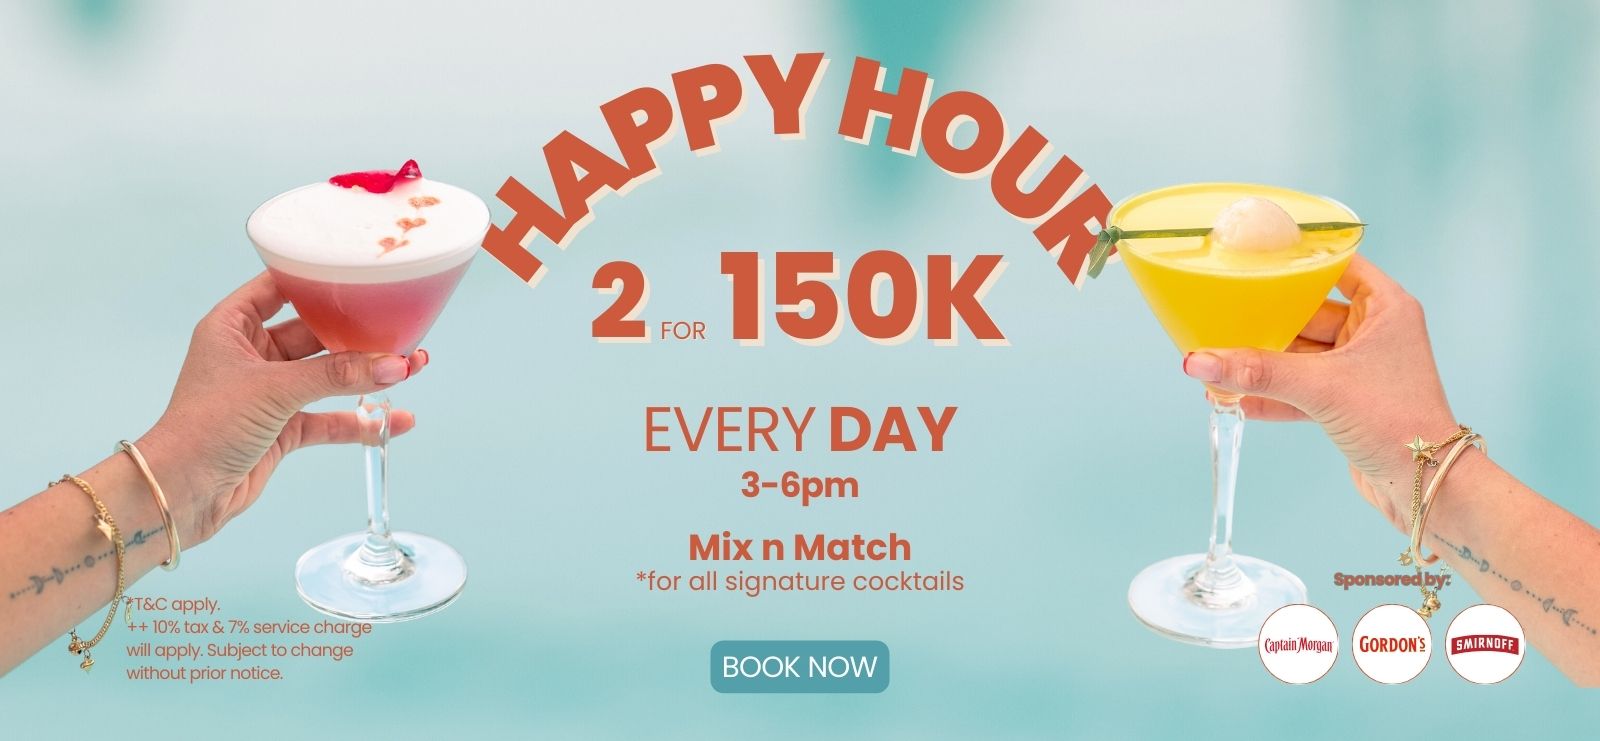 Happy Hour 2 for 150K